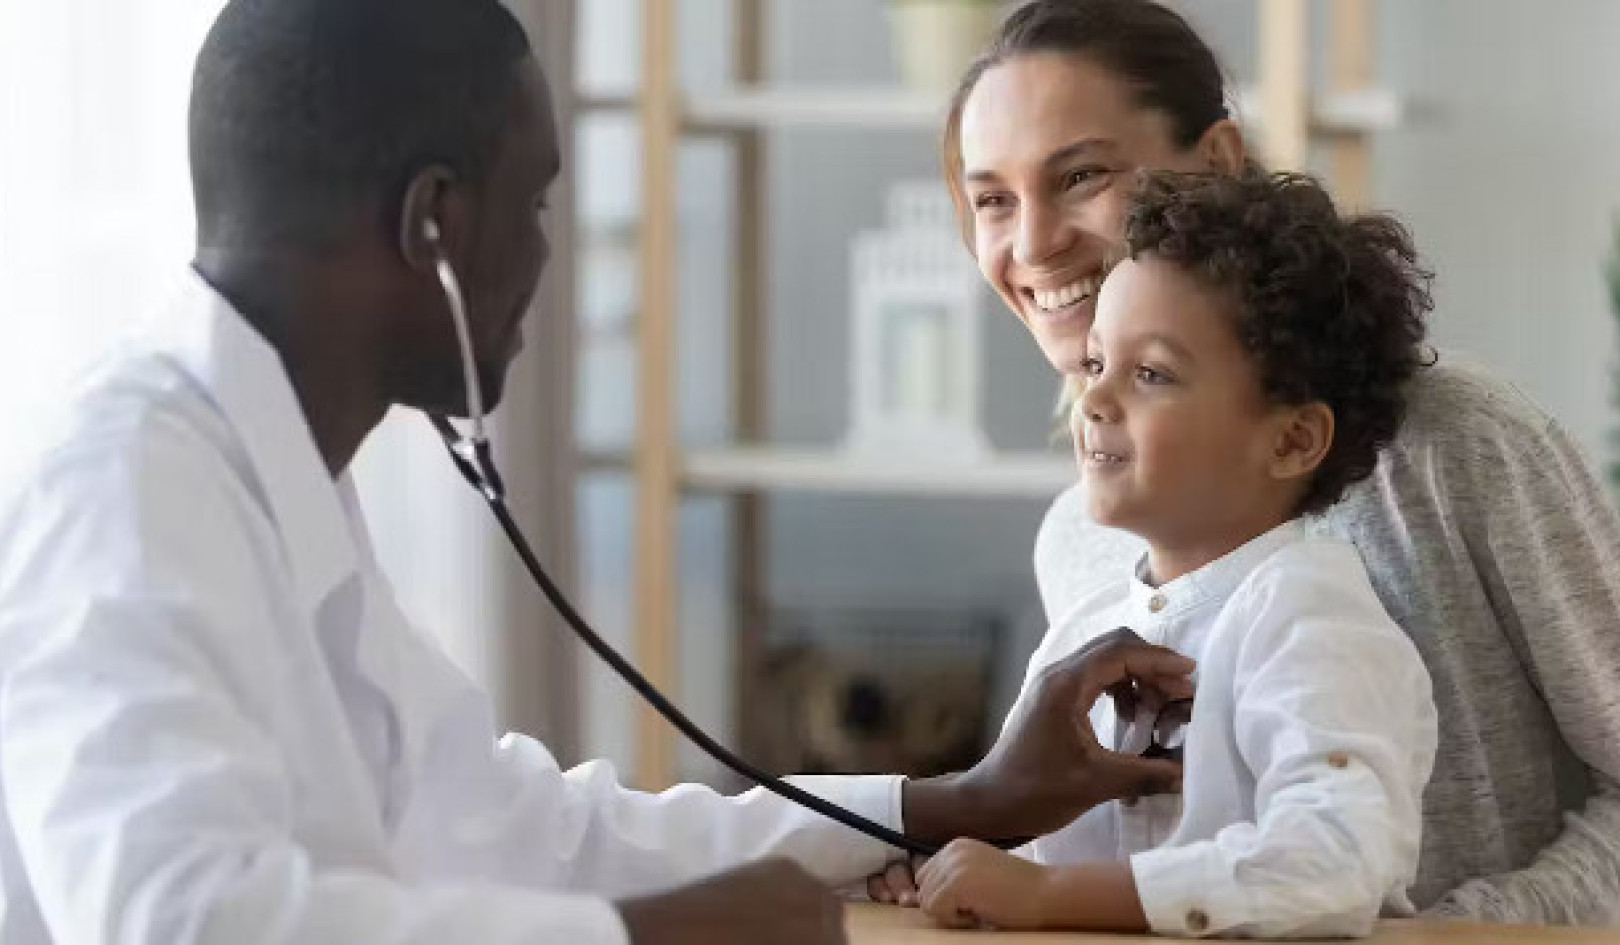 No Family Doctor? Here's Why It’s Hurting You and the System